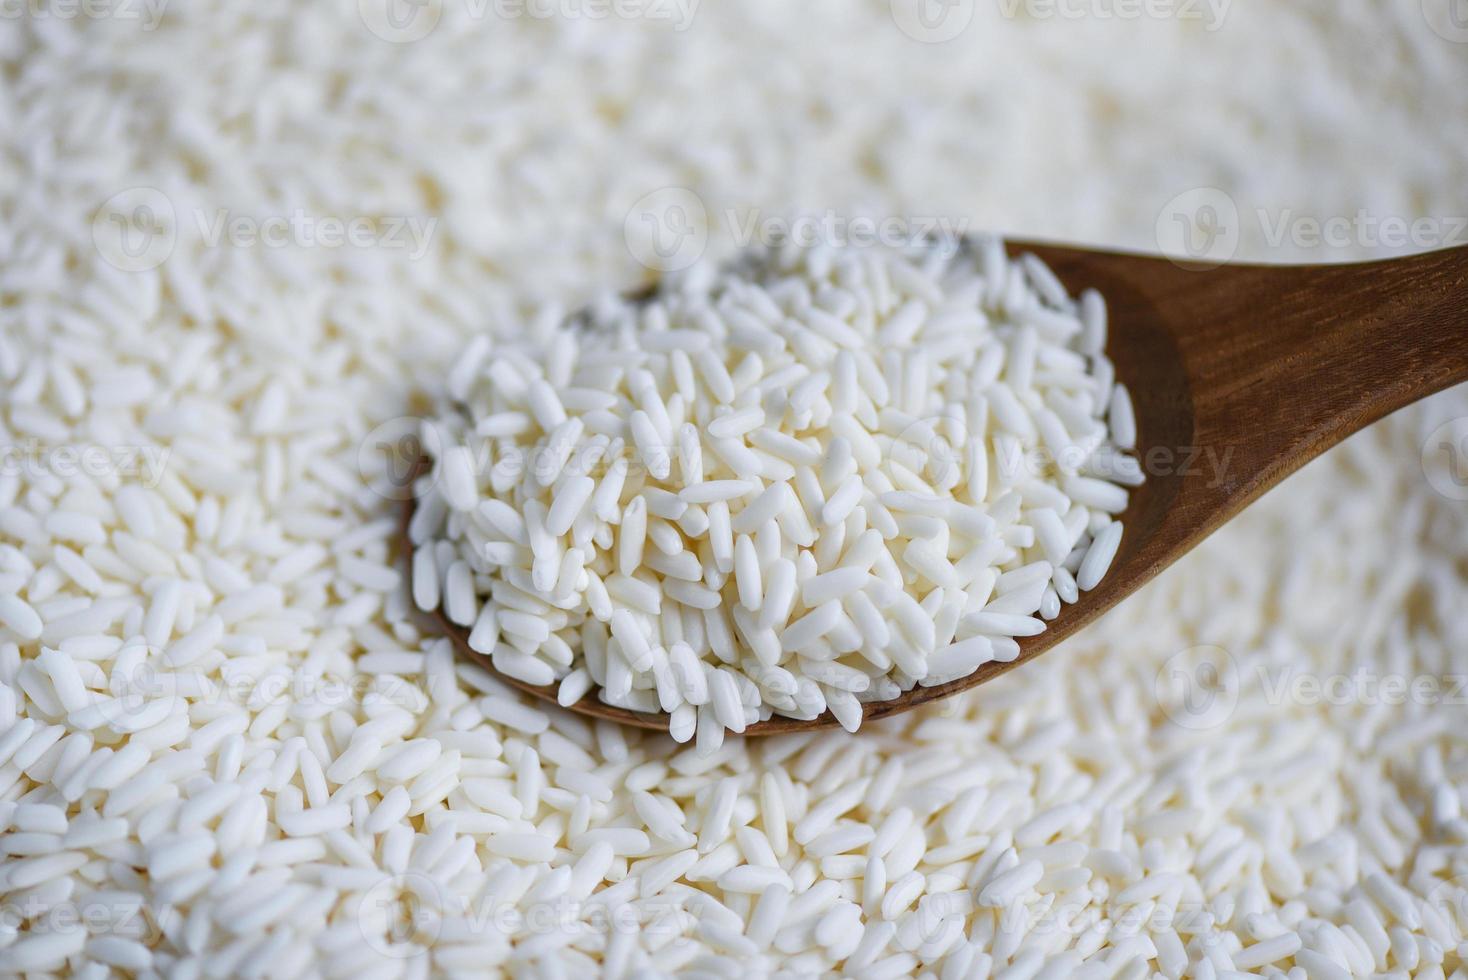 Jasmine white rice on wooden spoon in the the sack, harvest rice and food grains cooking concept photo